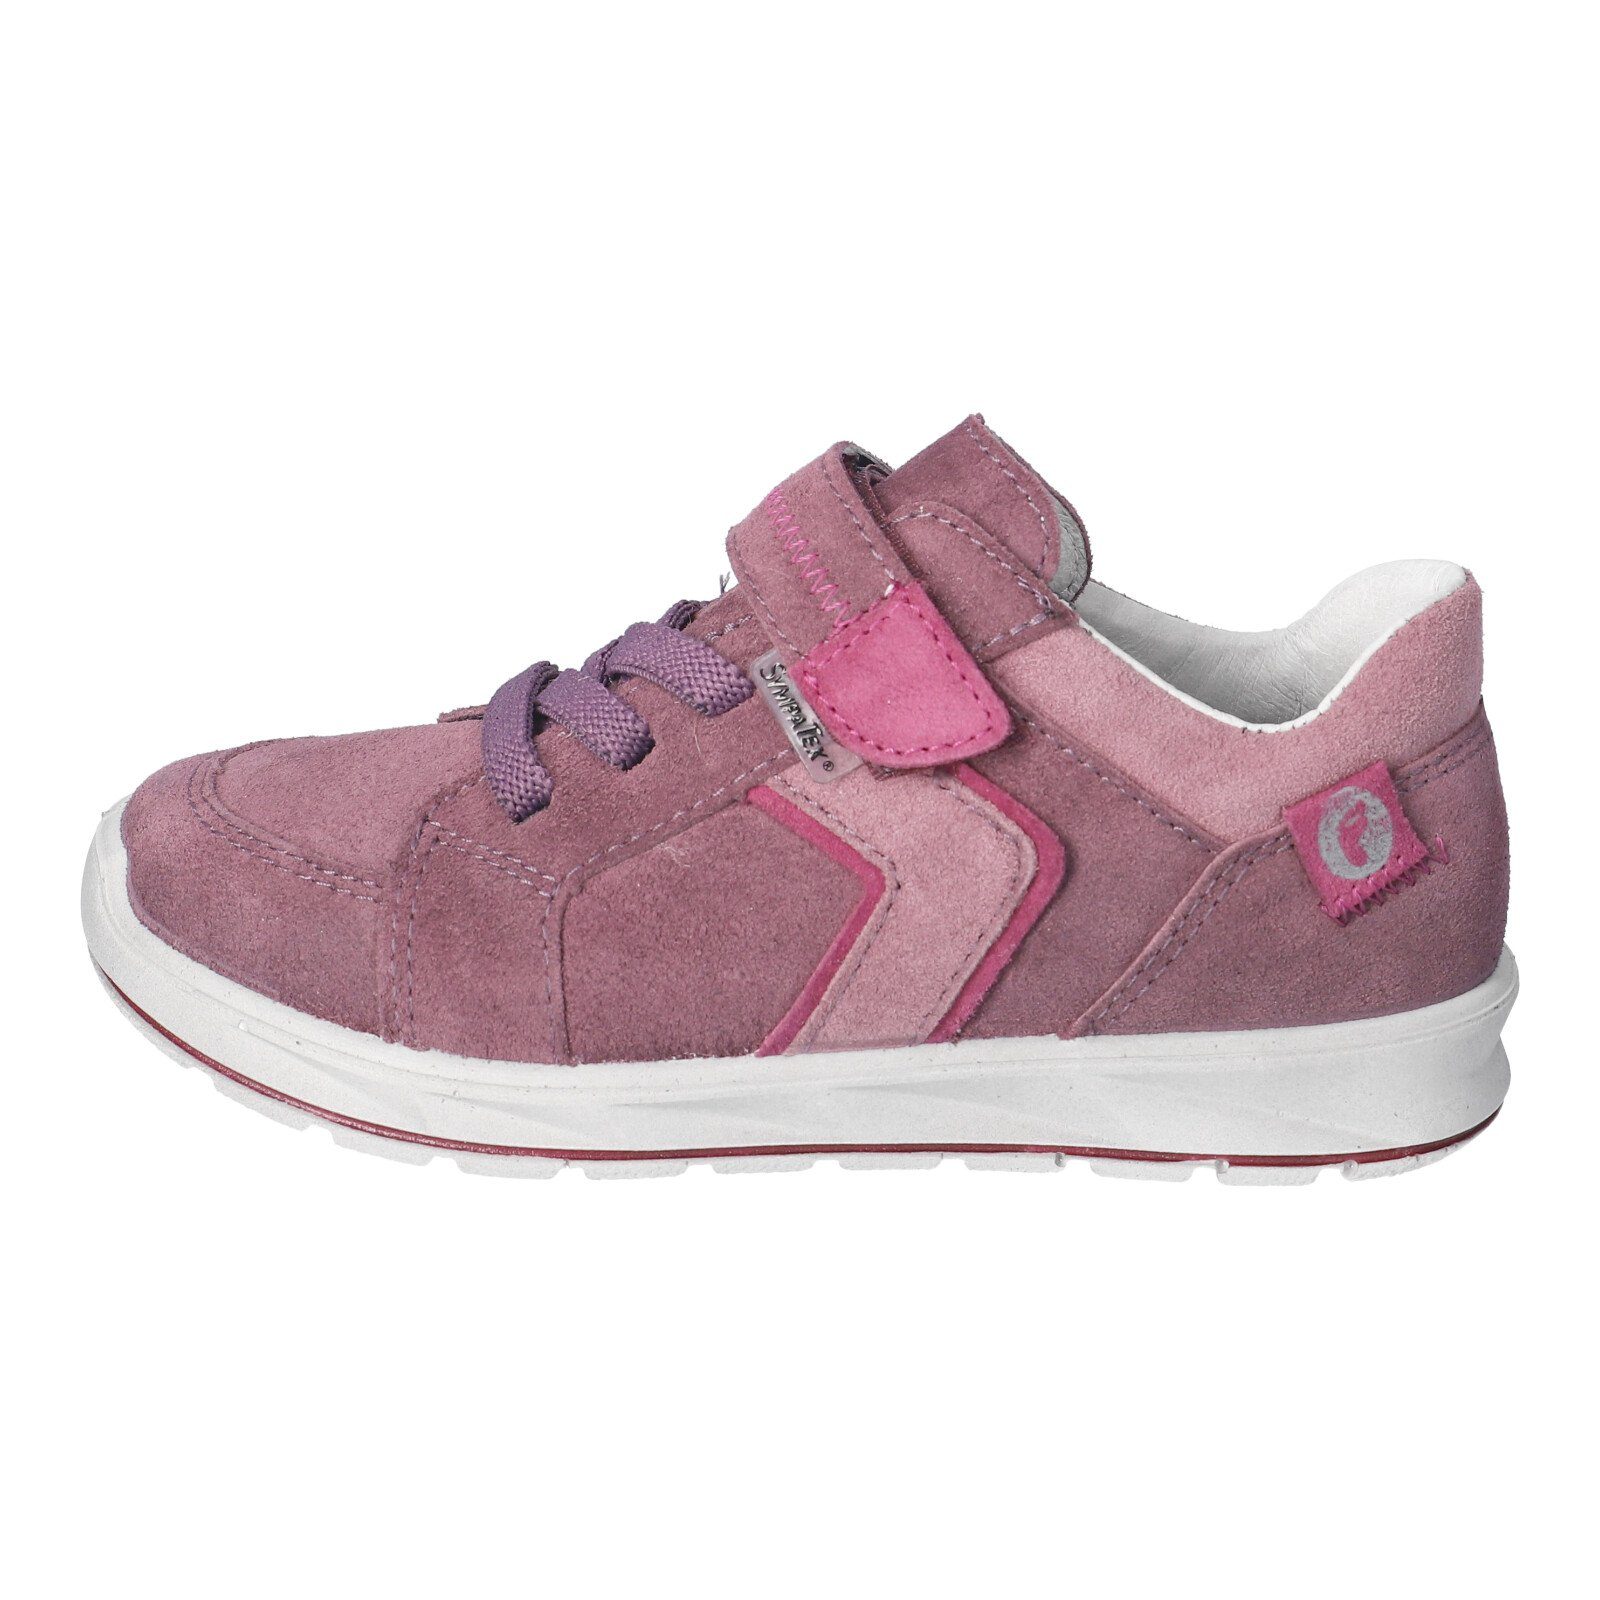 pflaume/sucre Sneaker (370) Ricosta